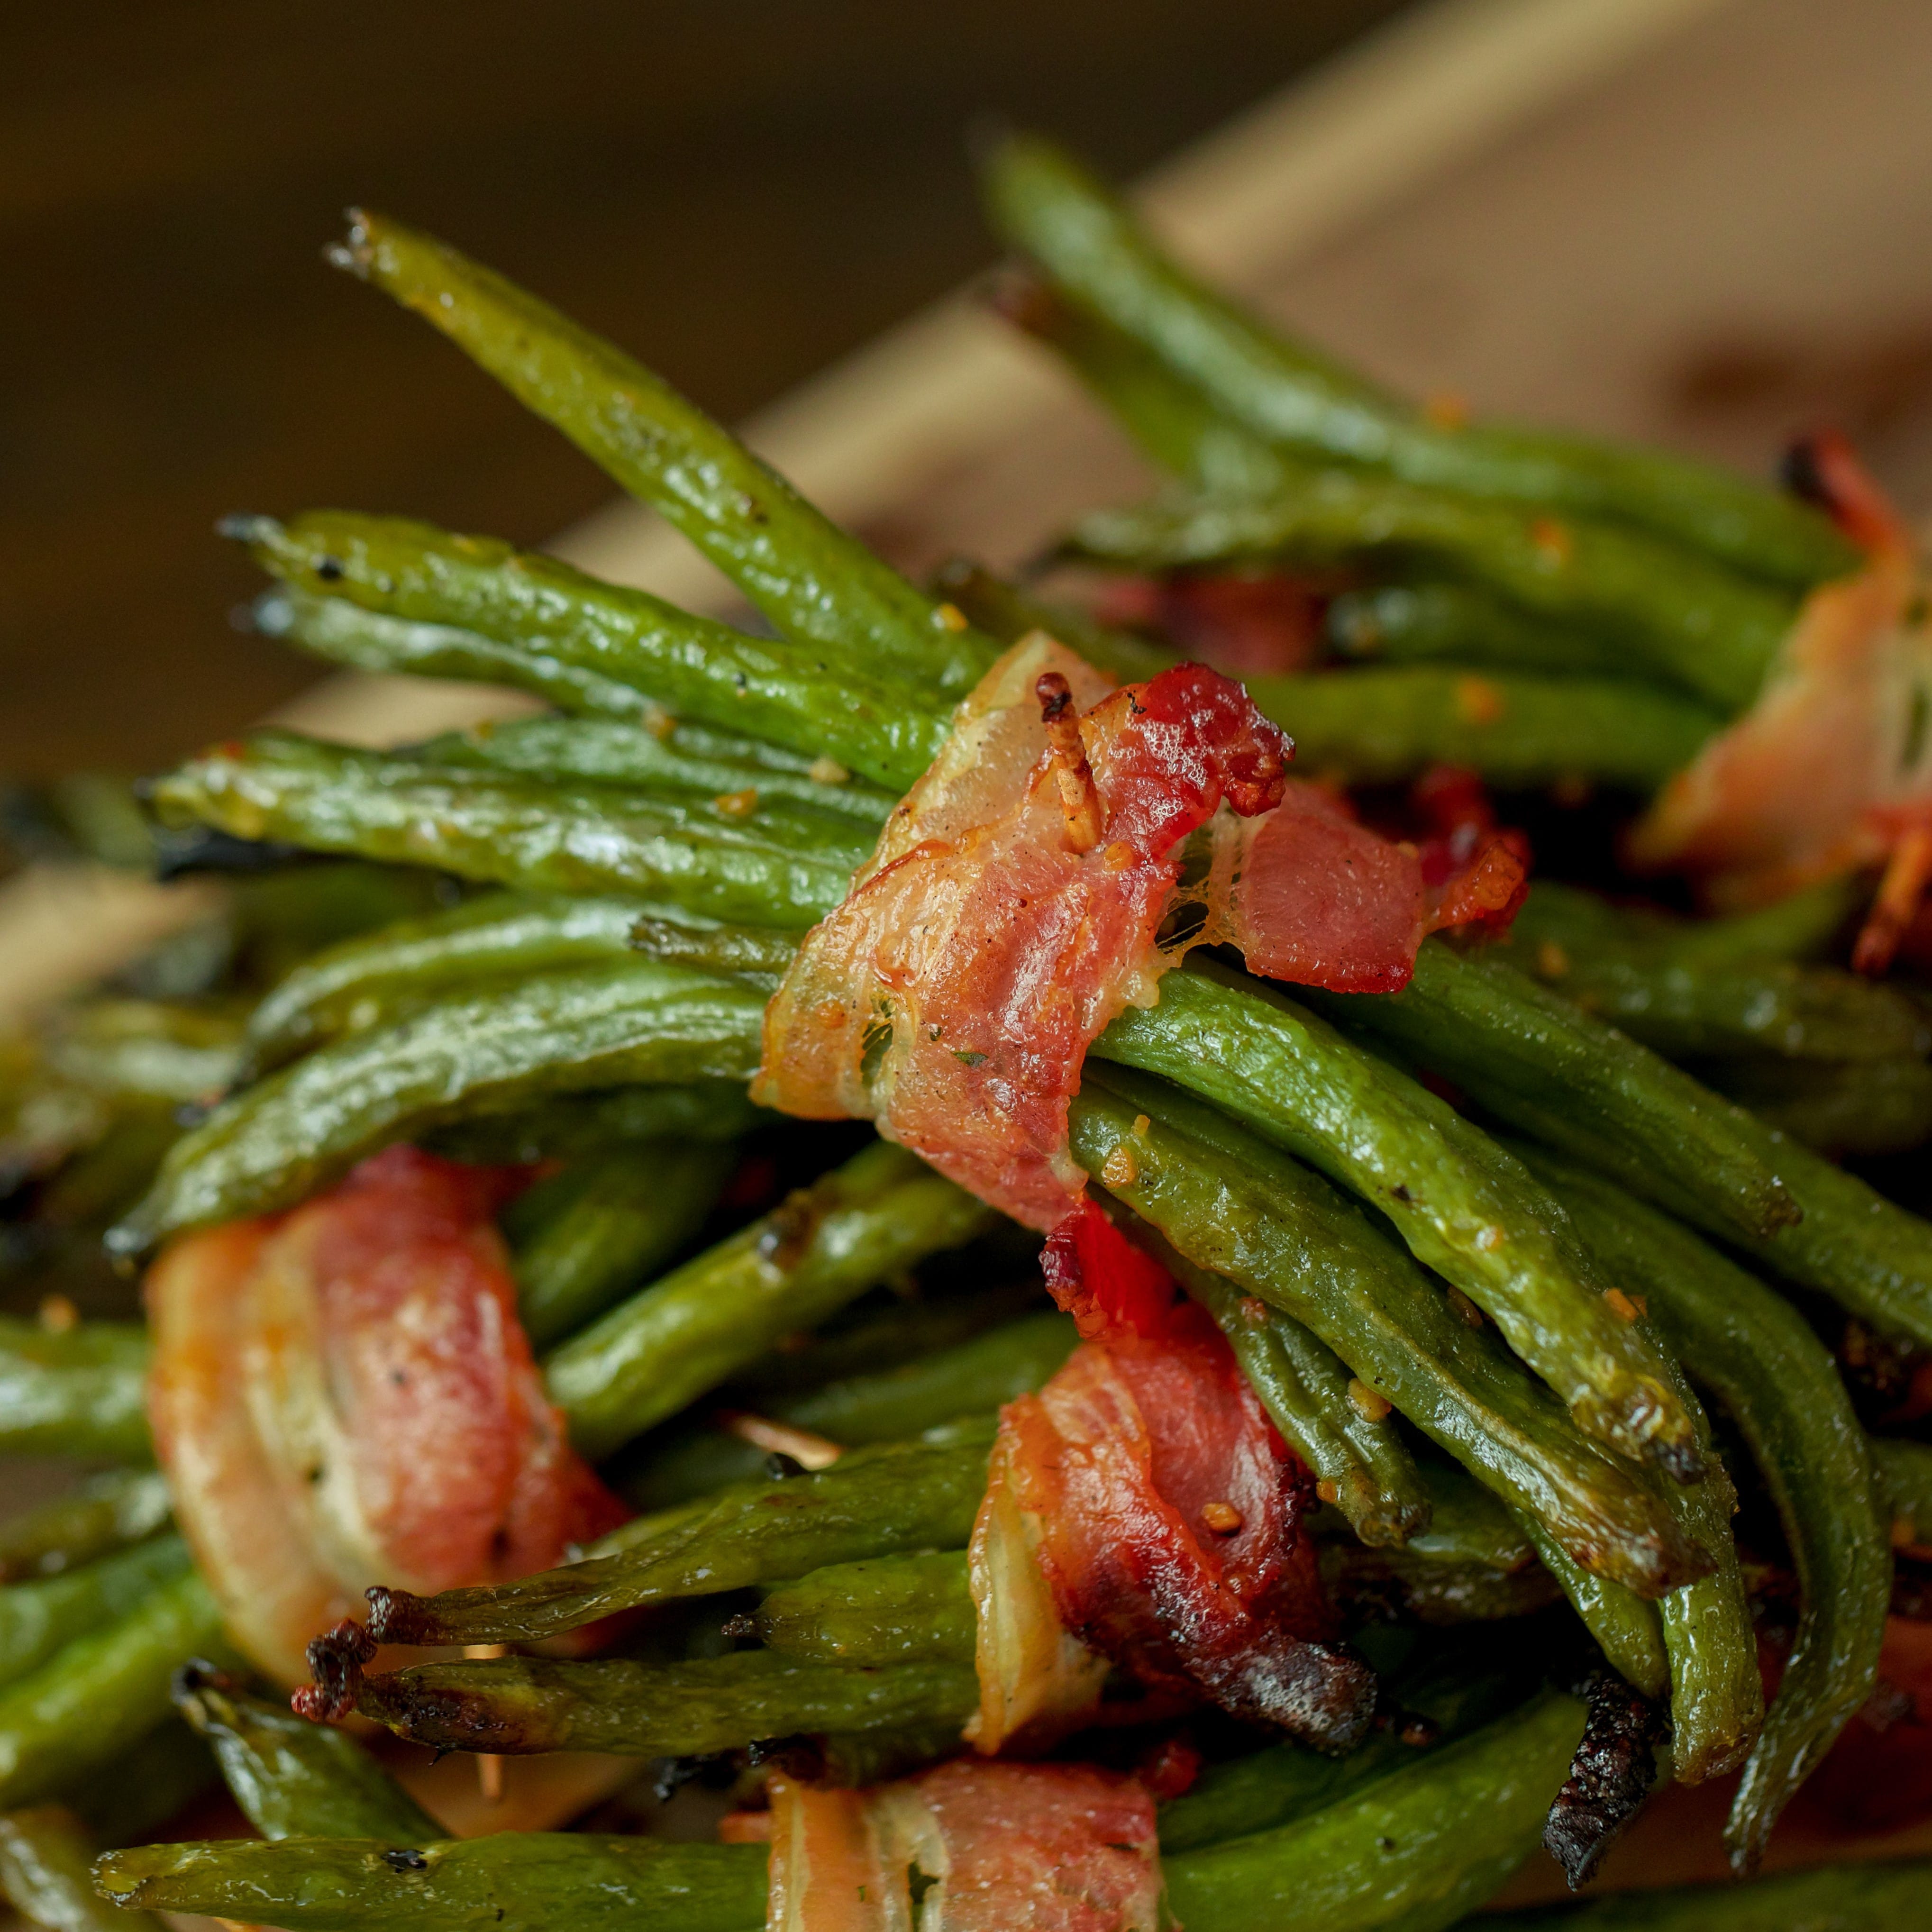 Bacon Wrapped Green Bean Bundles in a stack on a wooden cutting board